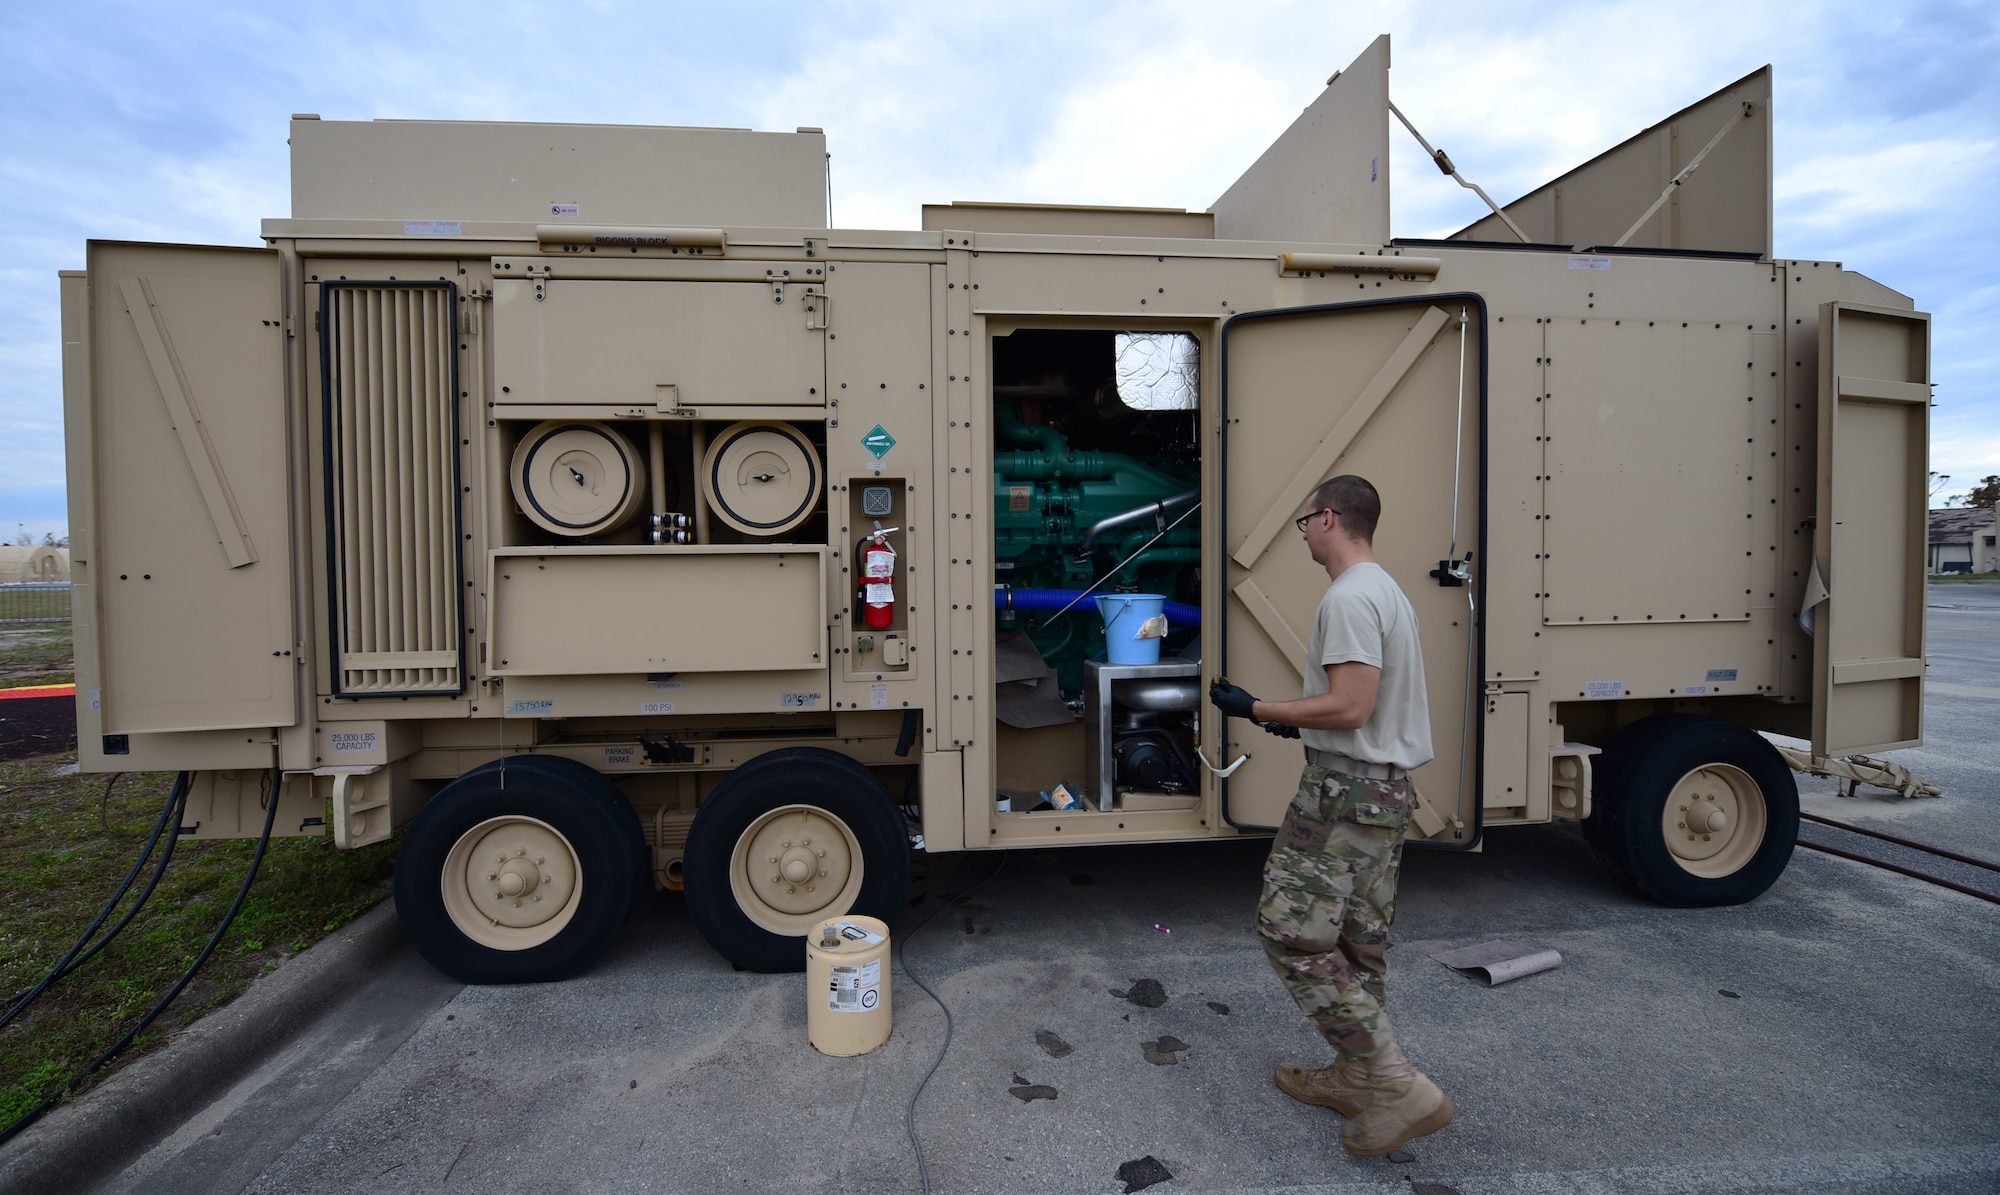 Staff Sgt. Joshua R. Olando, an electrical power production craftsman currently supporting the 325th Civil Engineer Squadron, prepares to change filters on a BPU 800 kilowatt high-voltage generator Nov. 30, 2018, at Tyndall Air Force Base, Fla. In the wake of Hurricane Michael, support and supplies from around the country poured in to assist Tyndall in recovery efforts. Olando is currently deployed from the 436th Civil Engineer Squadron at Dover Air Force Base, Del. (U.S. Air Force photo by Senior Airman Isaiah J. Soliz)